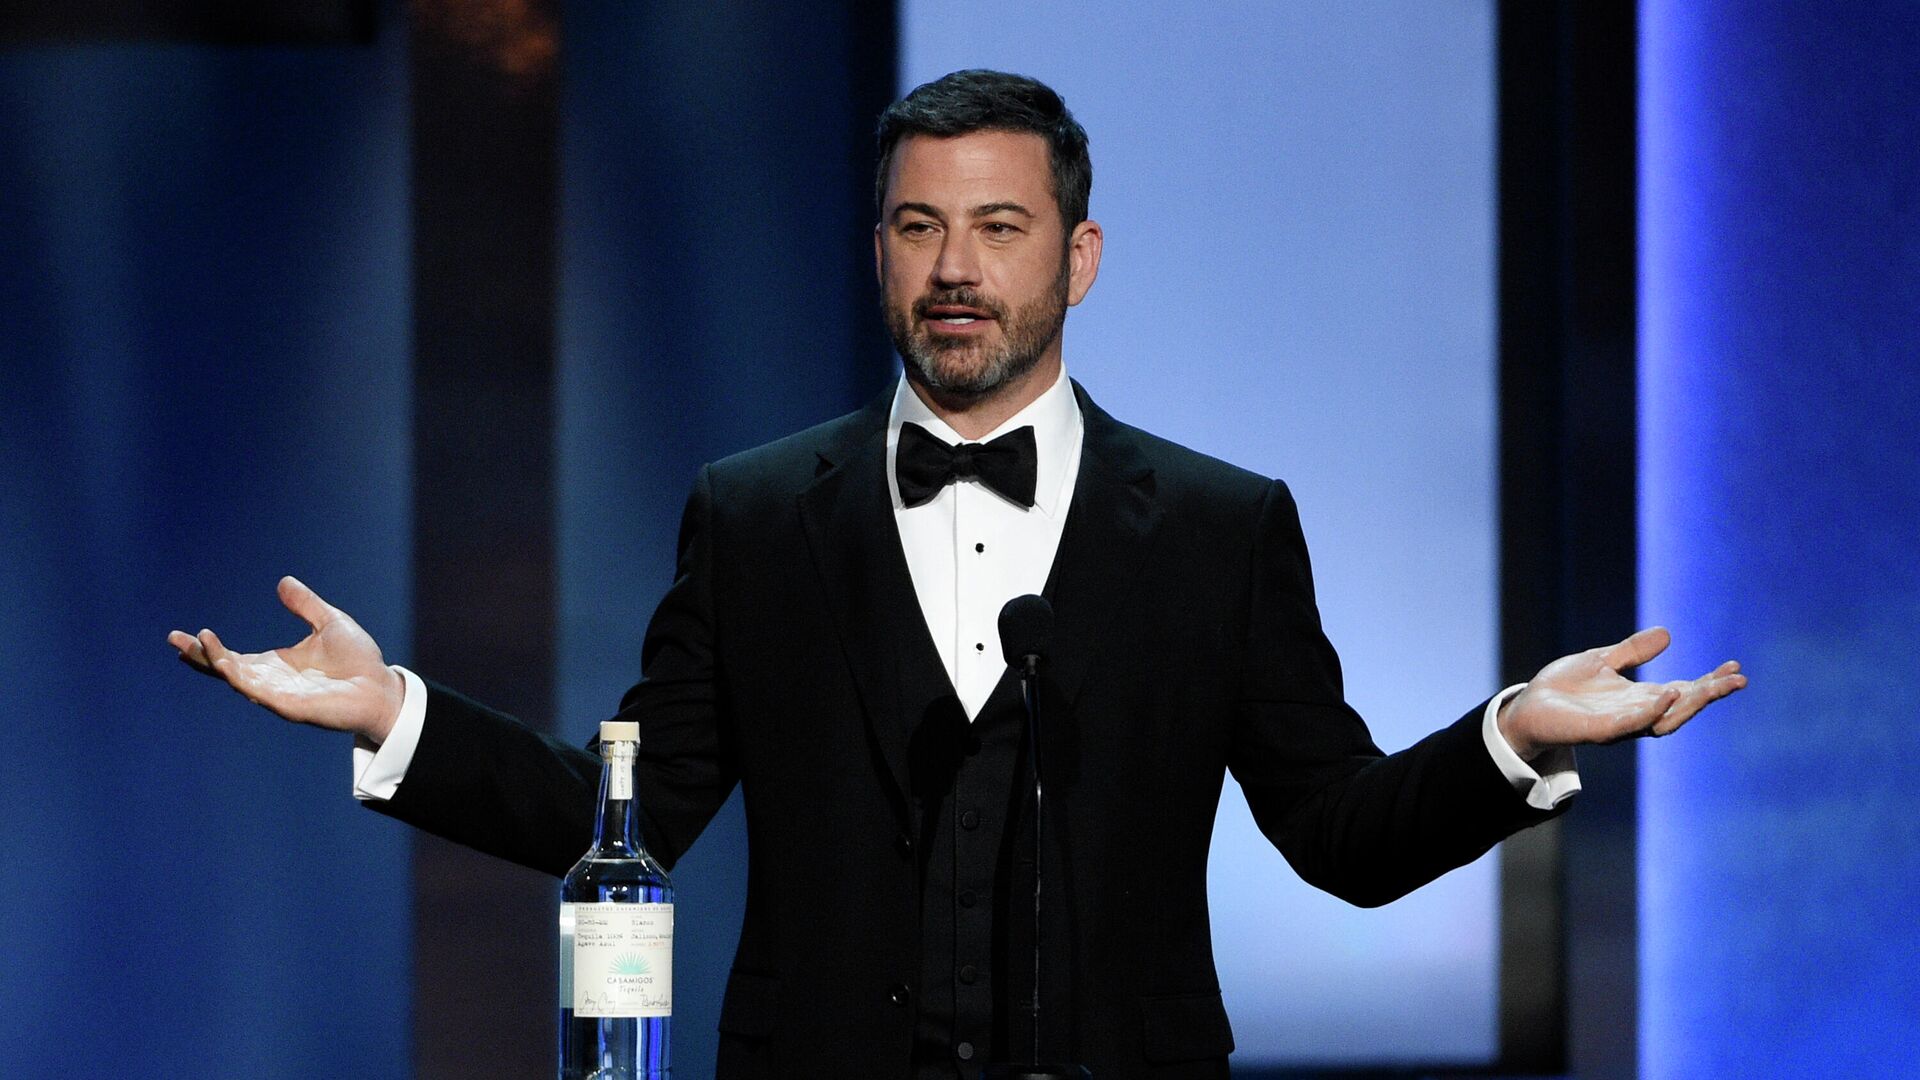 Comedian Jimmy Kimmel addresses the audience during the 46th AFI Life Achievement Award gala ceremony honoring actor/director George Clooney at the Dolby Theatre, Thursday, June 7, 2018, in Los Angeles - Sputnik International, 1920, 29.01.2022